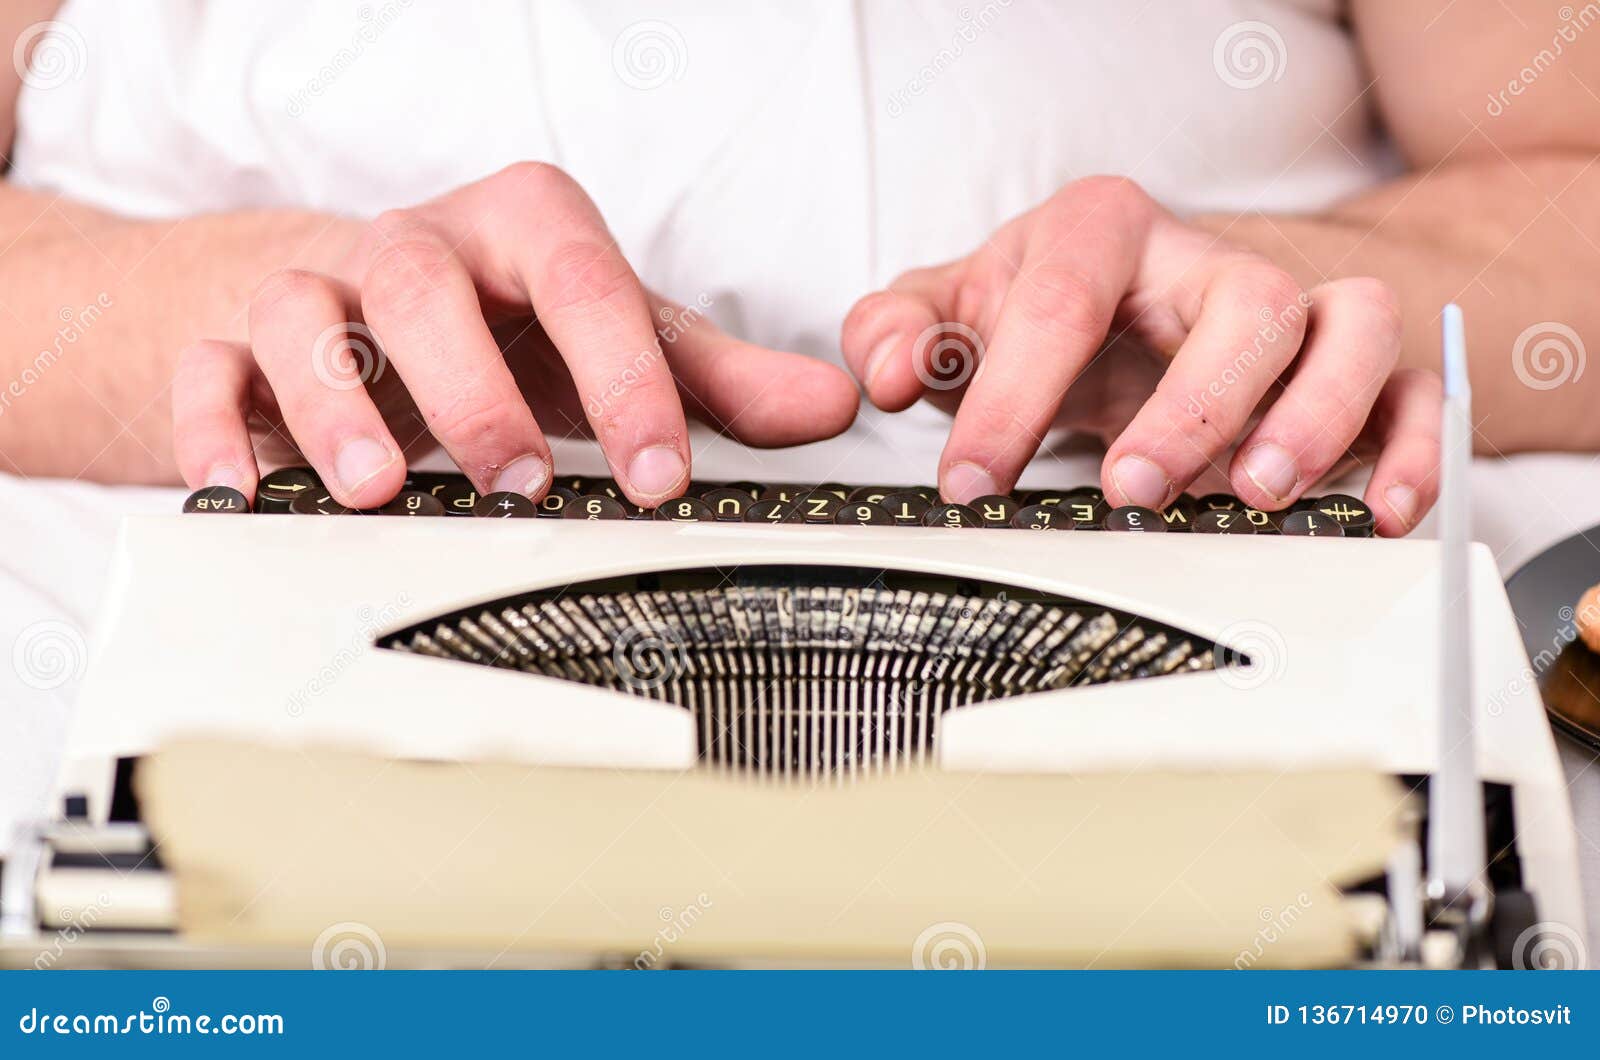 vintage typewriter concept. hands typing retro writing machine. old typewriter and authors hands. male hands type story